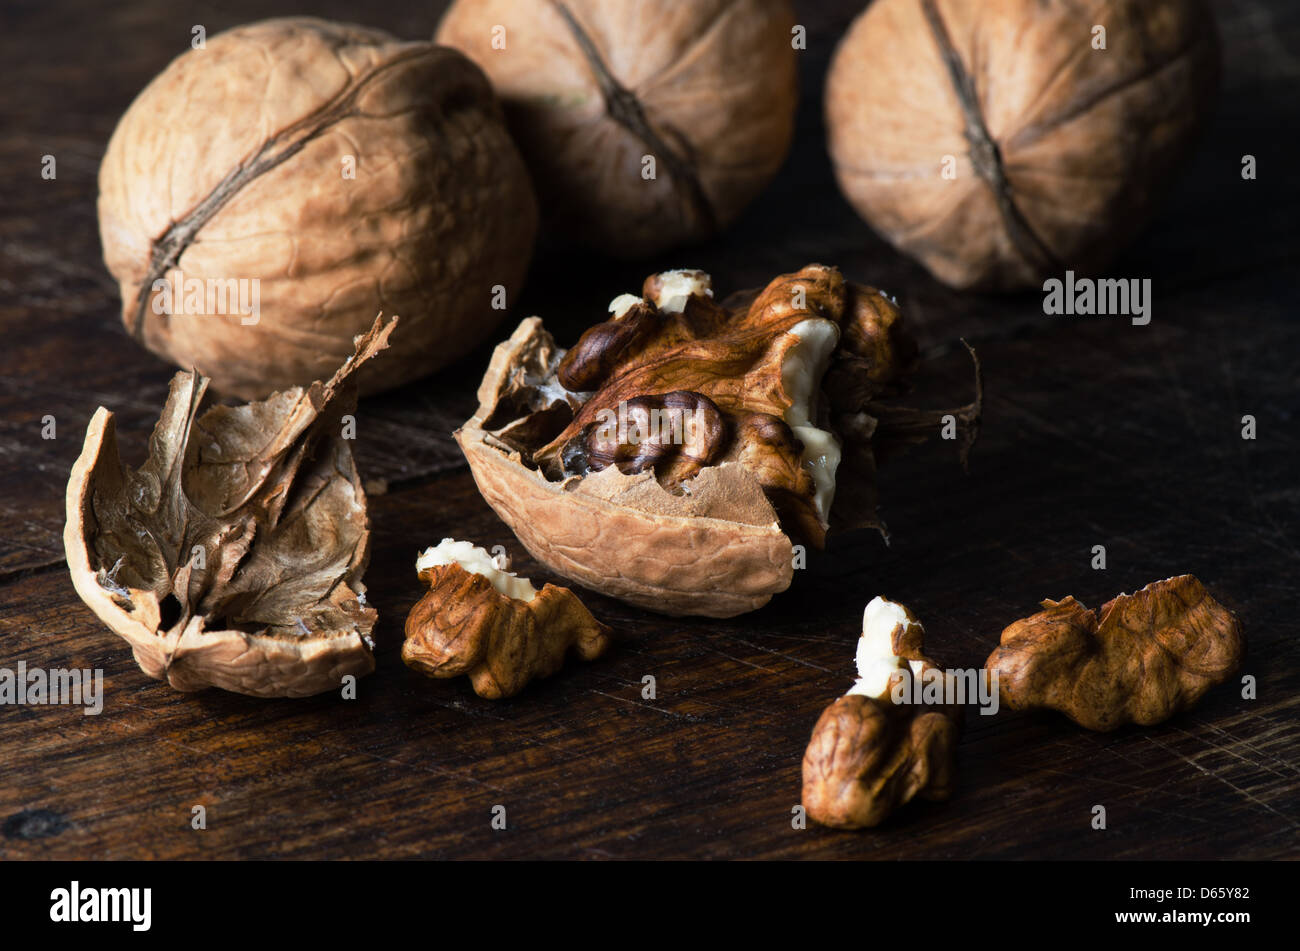 Walnuts on wooden table Stock Photo